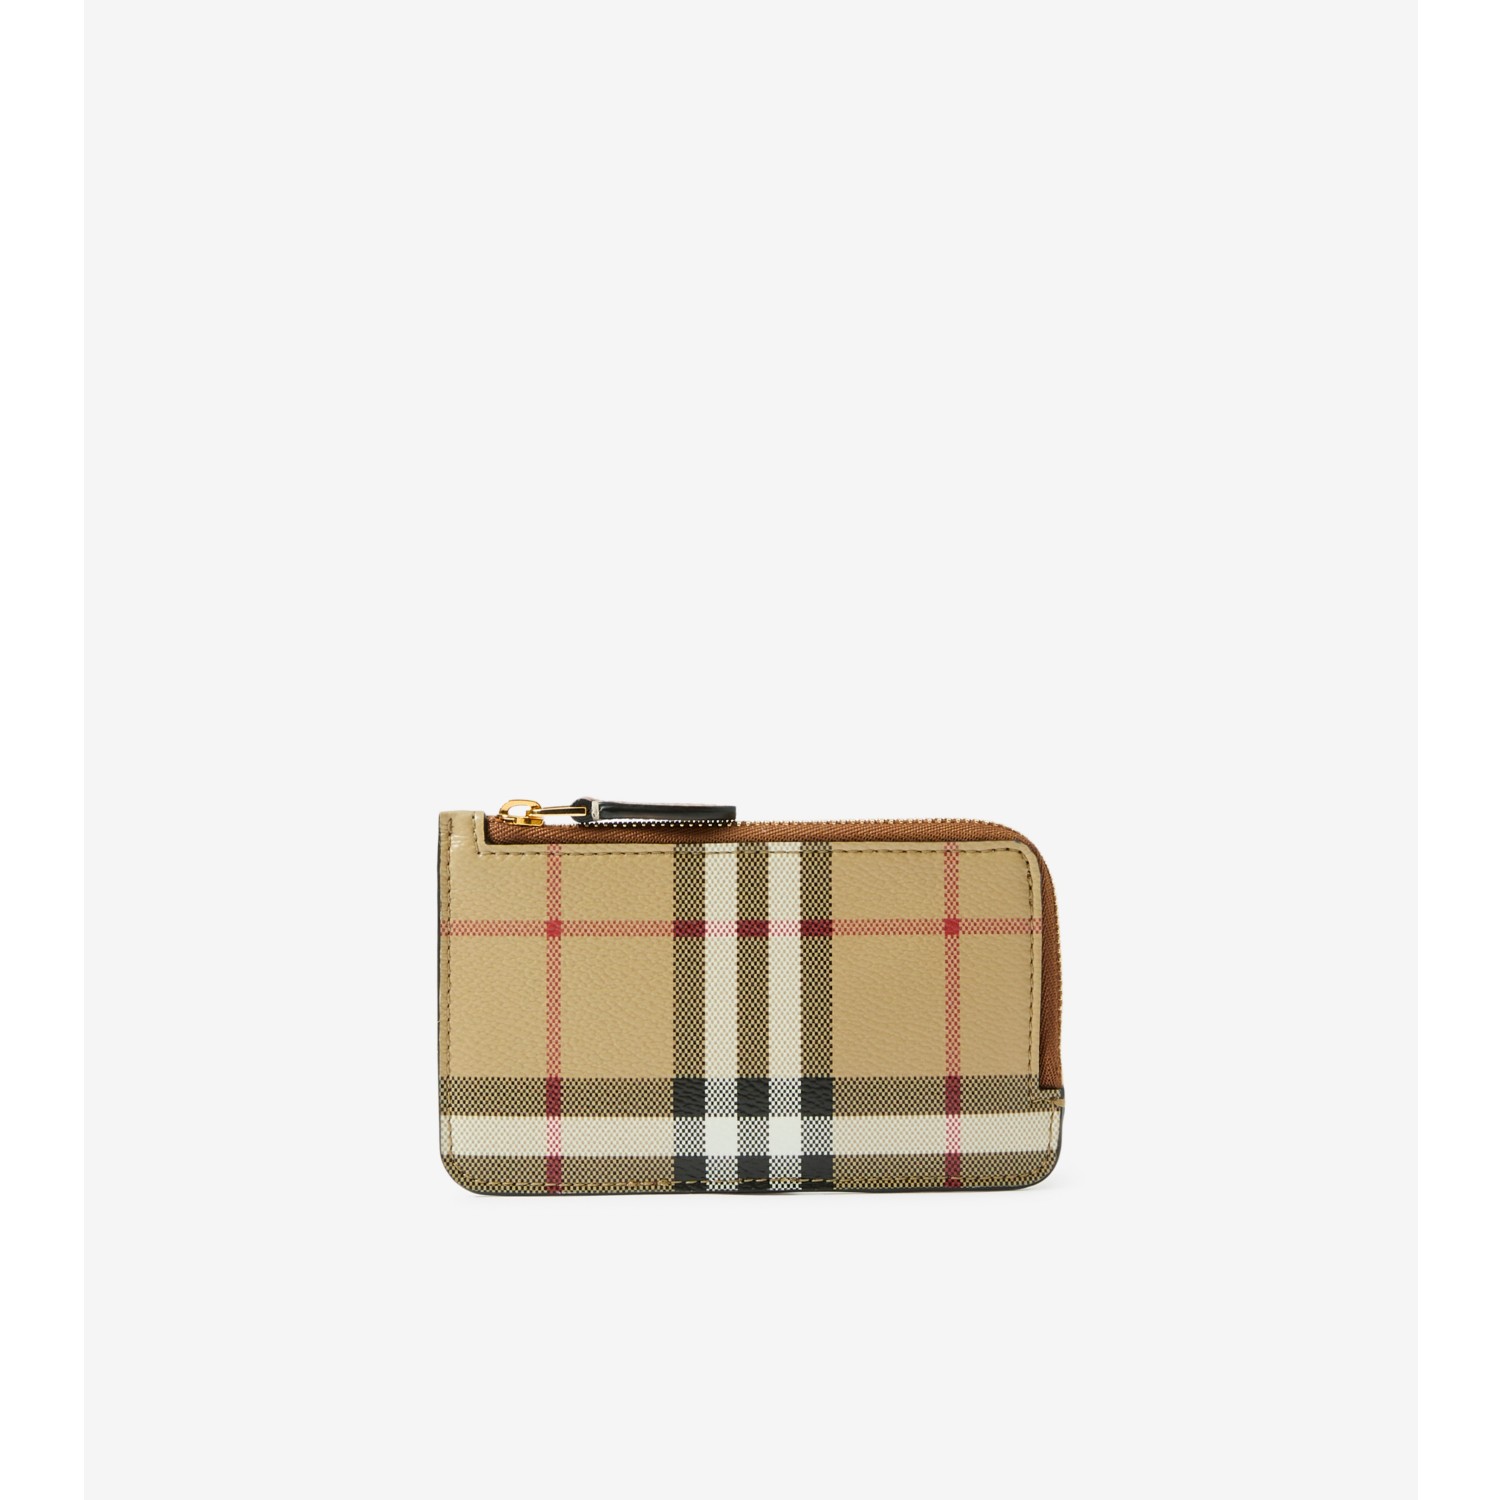 100% authentic vintage Burberry wallet in perfect